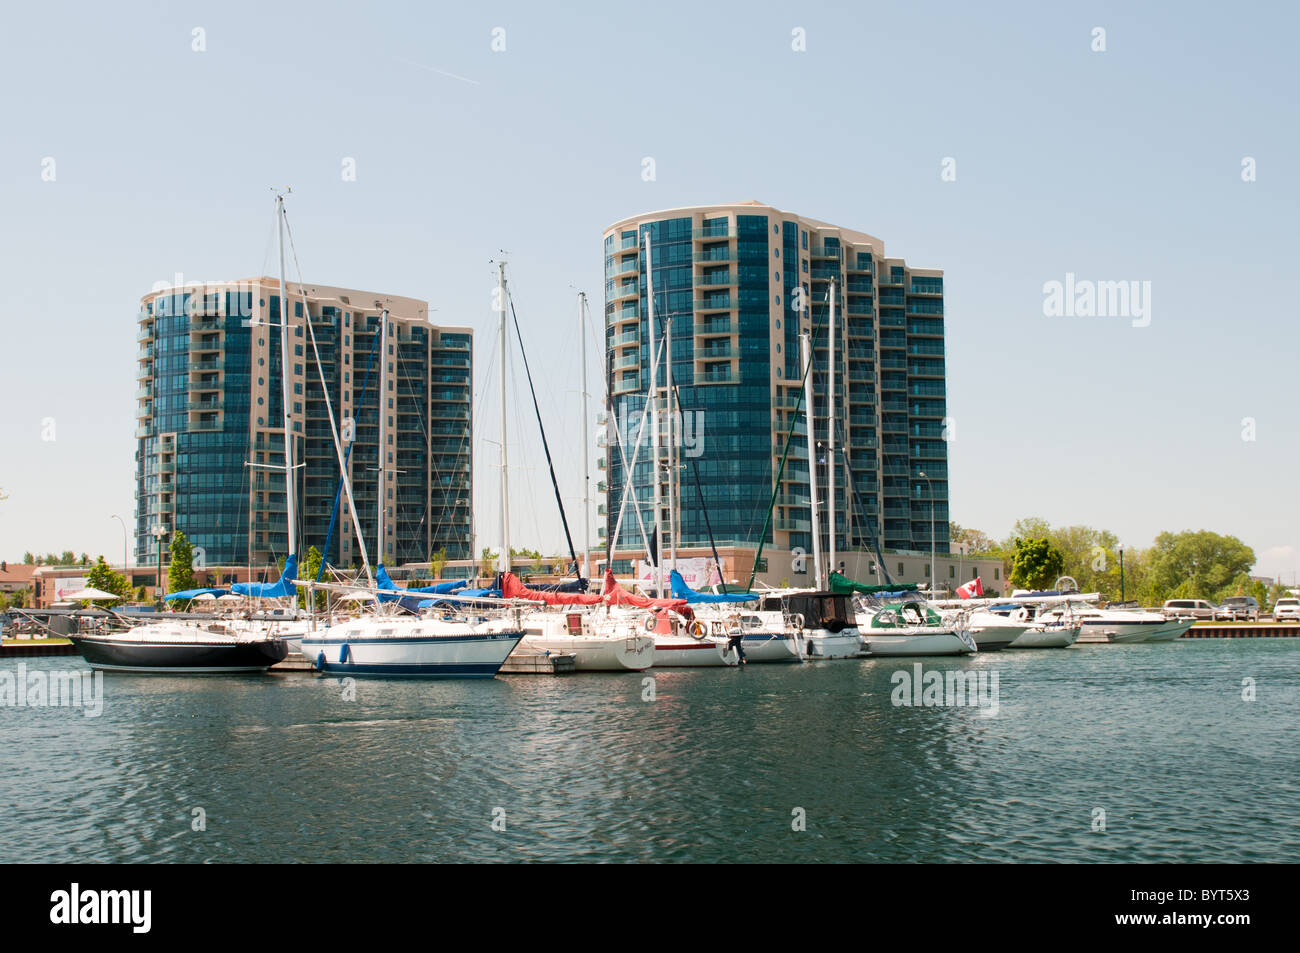 Marina in Barrie Ontario with boats and condos Stock Photo